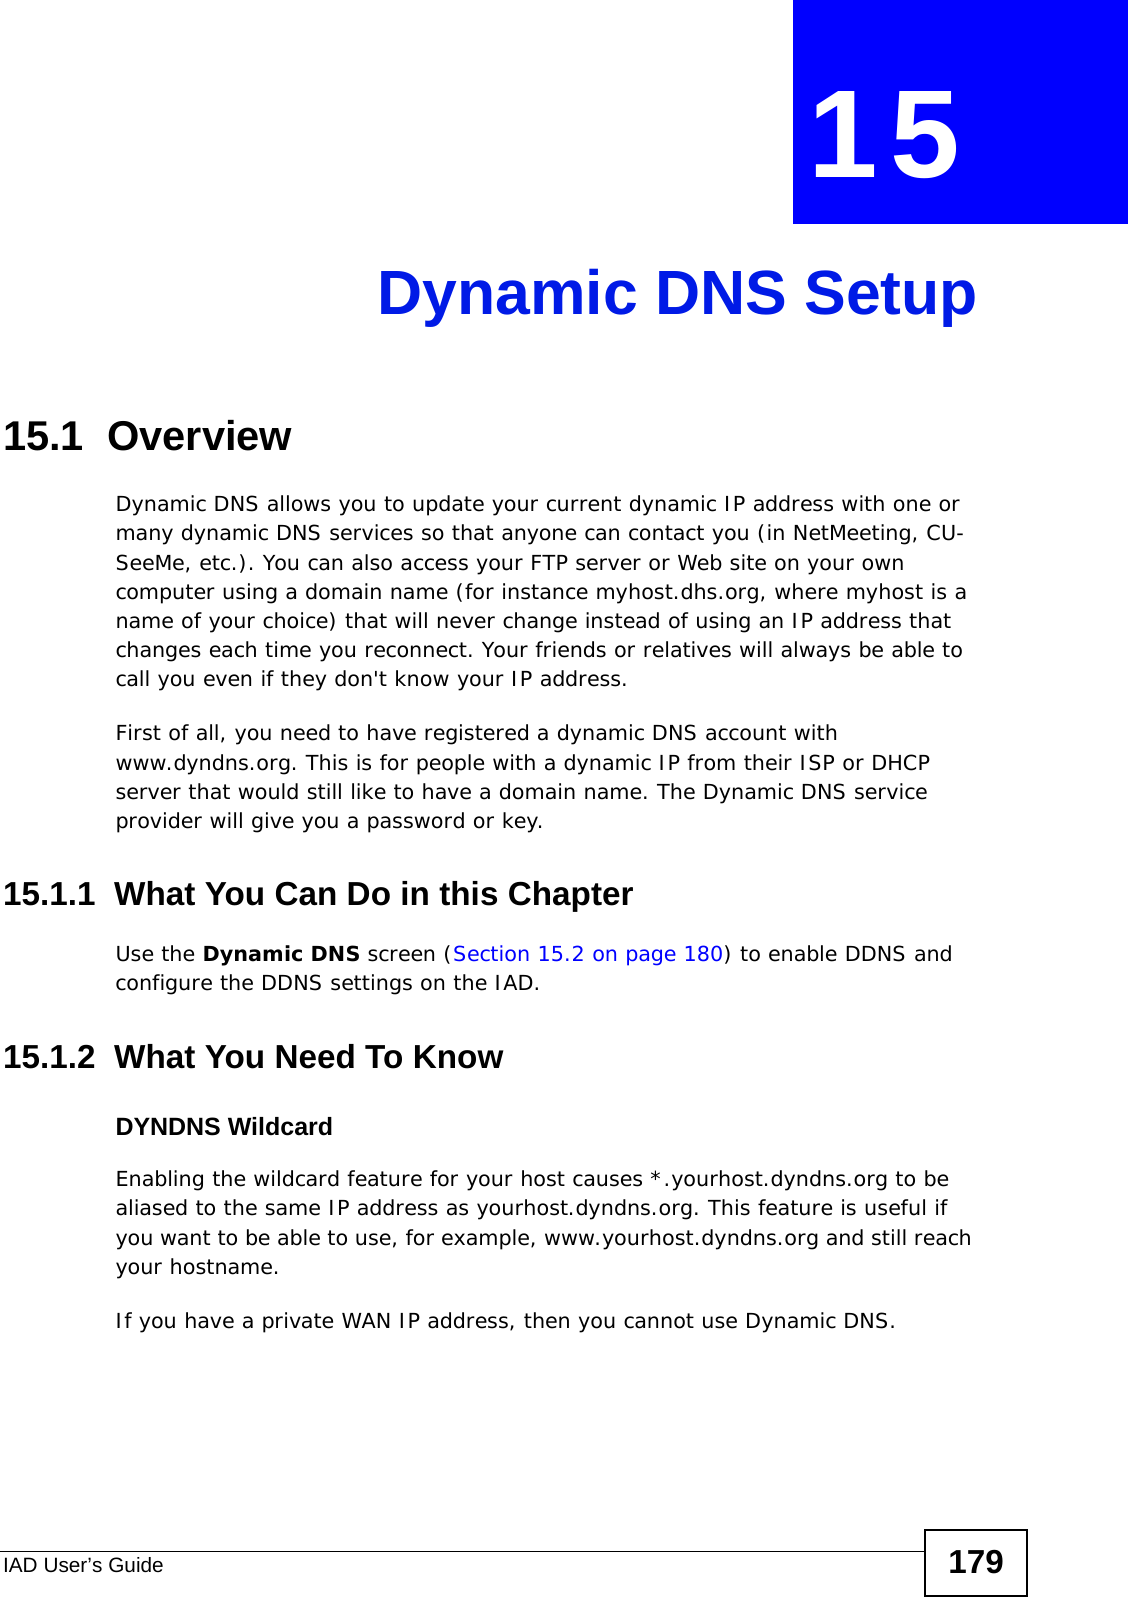 IAD User’s Guide 179CHAPTER  15 Dynamic DNS Setup15.1  Overview  Dynamic DNS allows you to update your current dynamic IP address with one or many dynamic DNS services so that anyone can contact you (in NetMeeting, CU-SeeMe, etc.). You can also access your FTP server or Web site on your own computer using a domain name (for instance myhost.dhs.org, where myhost is a name of your choice) that will never change instead of using an IP address that changes each time you reconnect. Your friends or relatives will always be able to call you even if they don&apos;t know your IP address.First of all, you need to have registered a dynamic DNS account with www.dyndns.org. This is for people with a dynamic IP from their ISP or DHCP server that would still like to have a domain name. The Dynamic DNS service provider will give you a password or key. 15.1.1  What You Can Do in this ChapterUse the Dynamic DNS screen (Section 15.2 on page 180) to enable DDNS and configure the DDNS settings on the IAD.15.1.2  What You Need To KnowDYNDNS WildcardEnabling the wildcard feature for your host causes *.yourhost.dyndns.org to be aliased to the same IP address as yourhost.dyndns.org. This feature is useful if you want to be able to use, for example, www.yourhost.dyndns.org and still reach your hostname.If you have a private WAN IP address, then you cannot use Dynamic DNS.